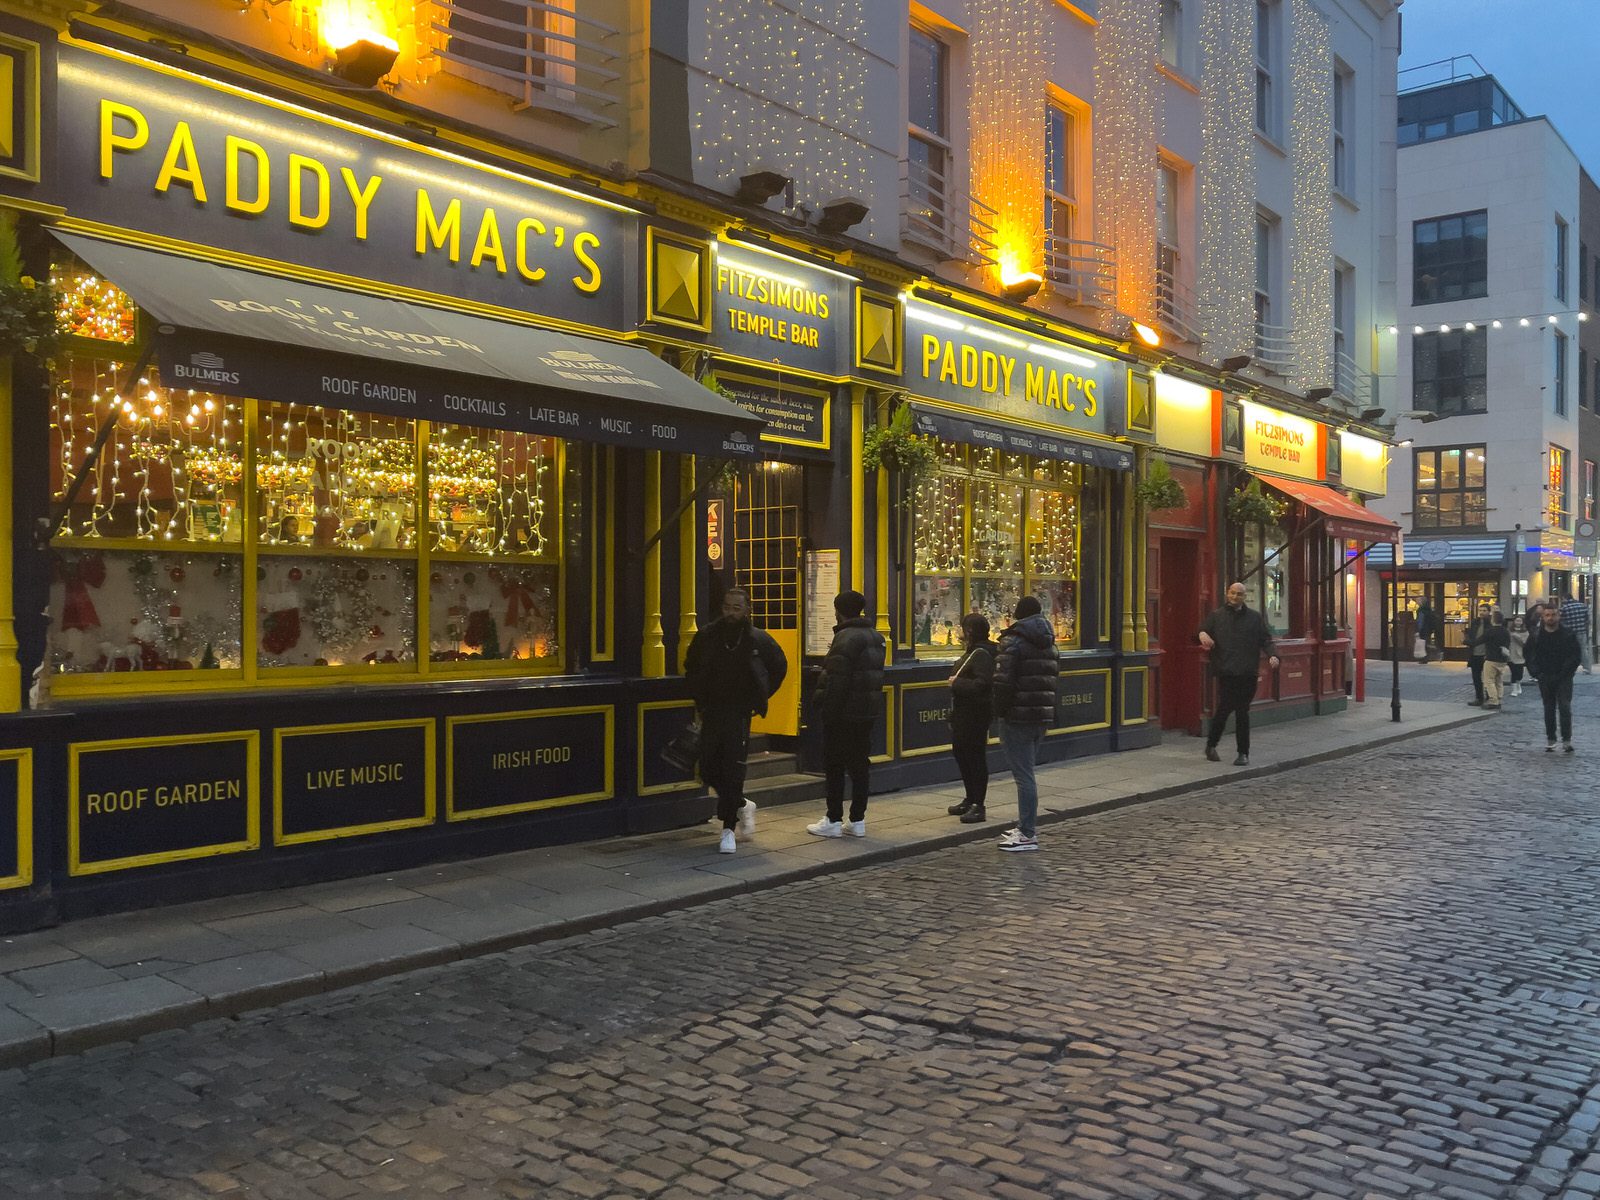 I VISITED TEMPLE BAR TODAY [AS NIGHTFALL WAS APPROACHING]-225365-1